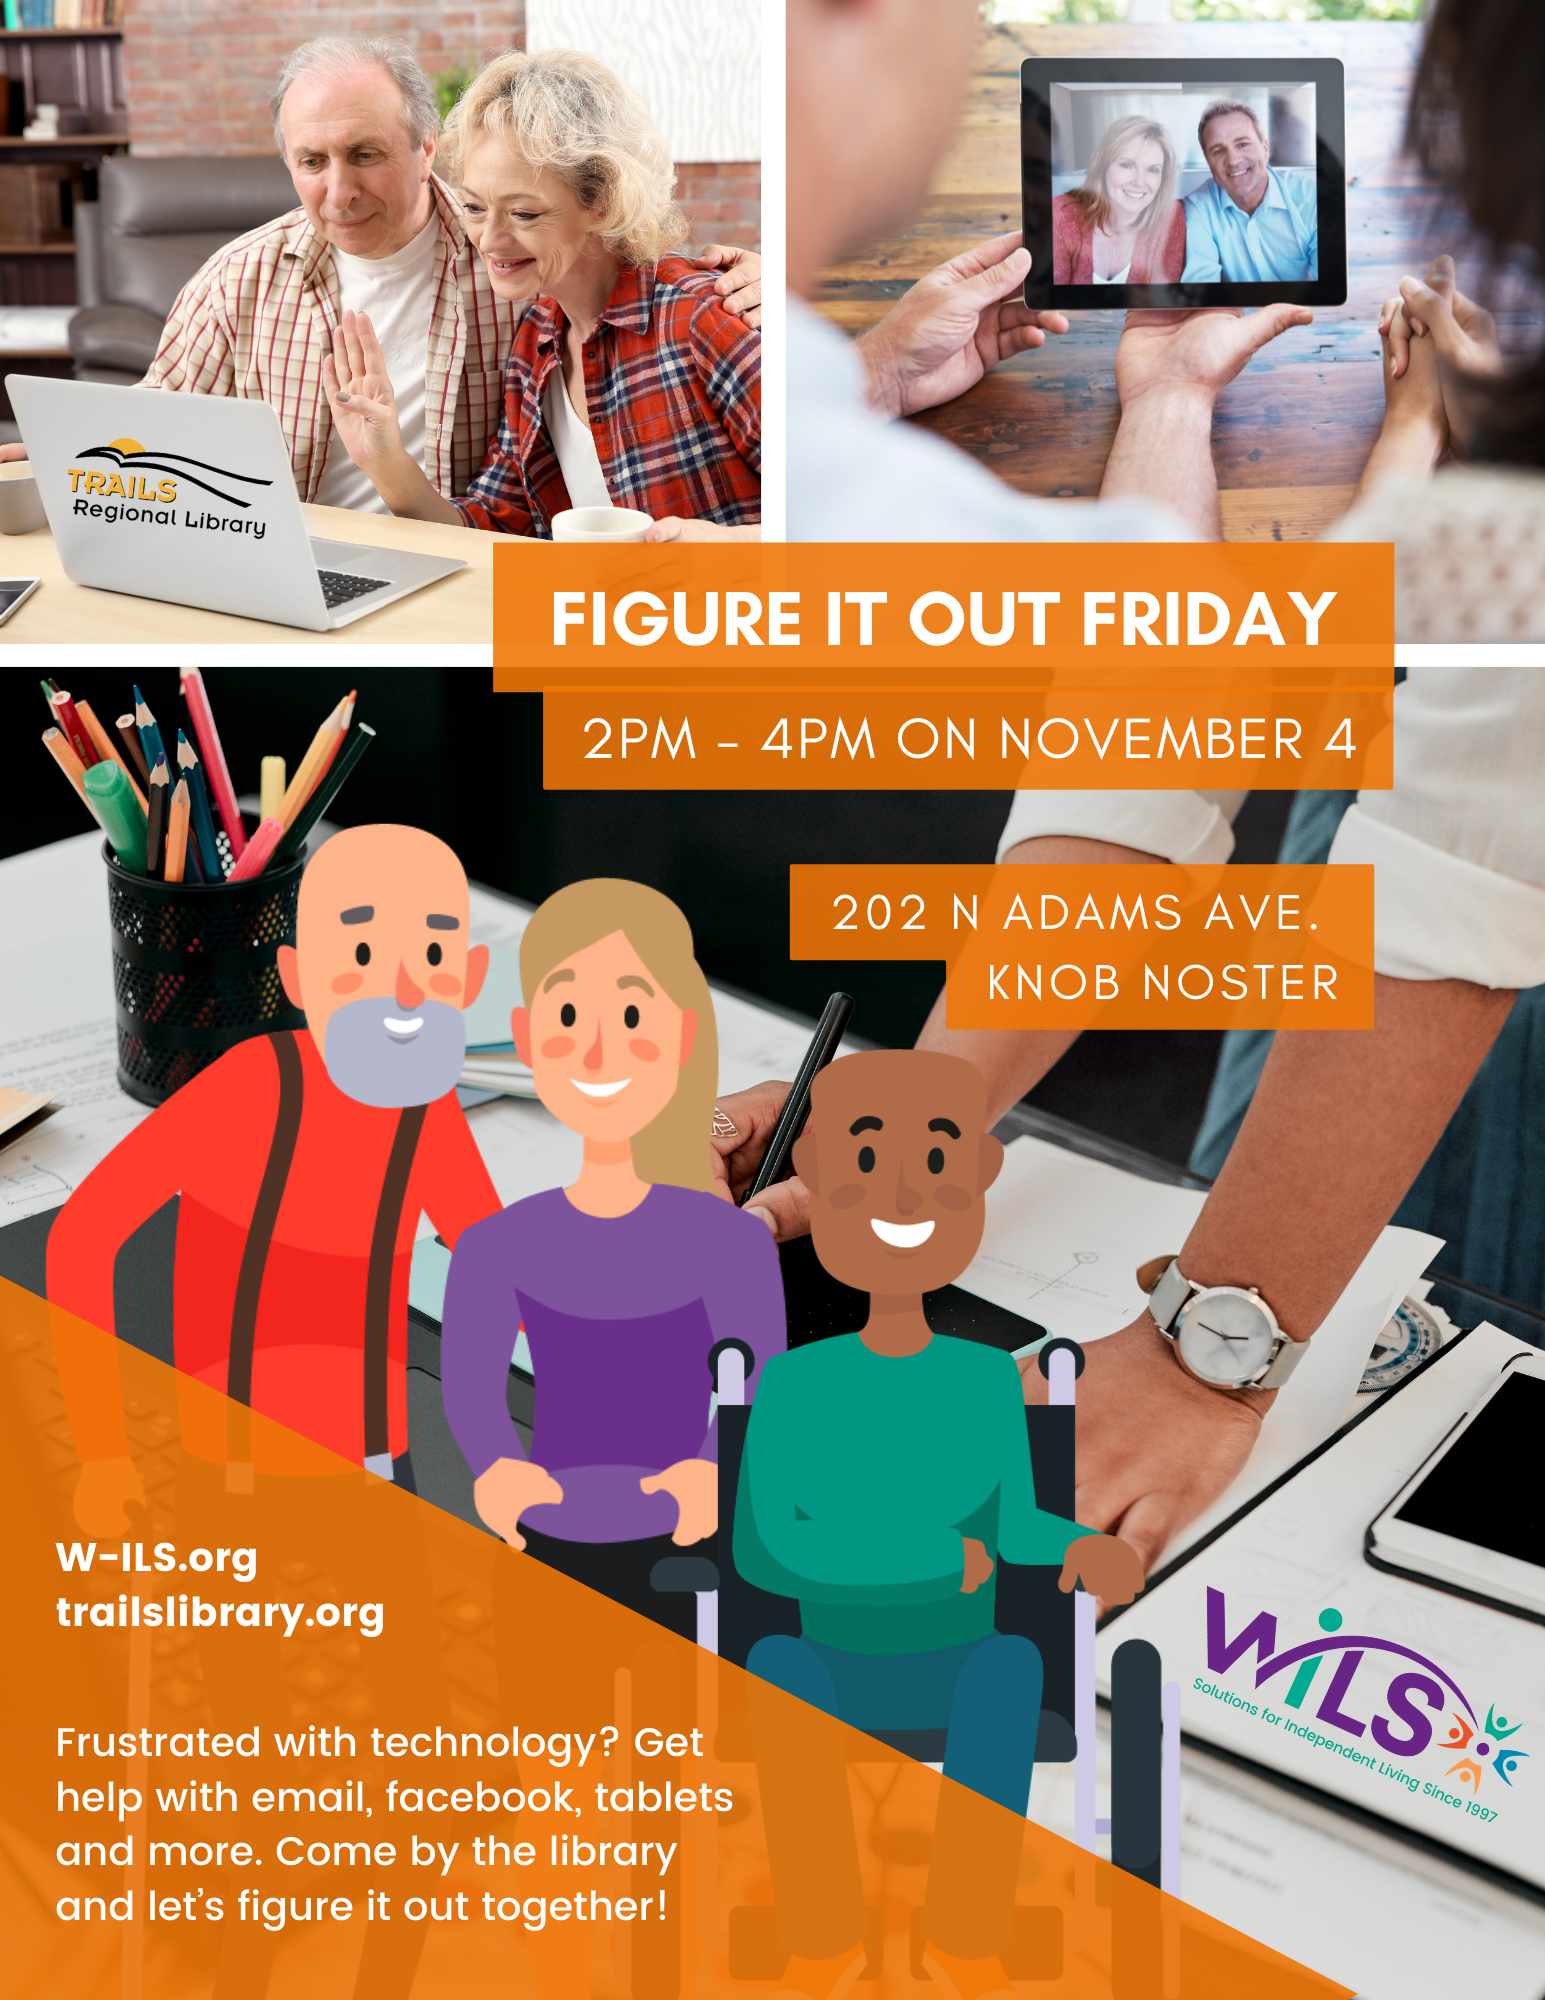 Figure it out Friday. Nov 4, 2pm - 4pm at Knob Noster Trails Regional Library.  Frustrated with technology? Get help with email, facebook, tablets and more. Come by the library and let’s figure it out together!